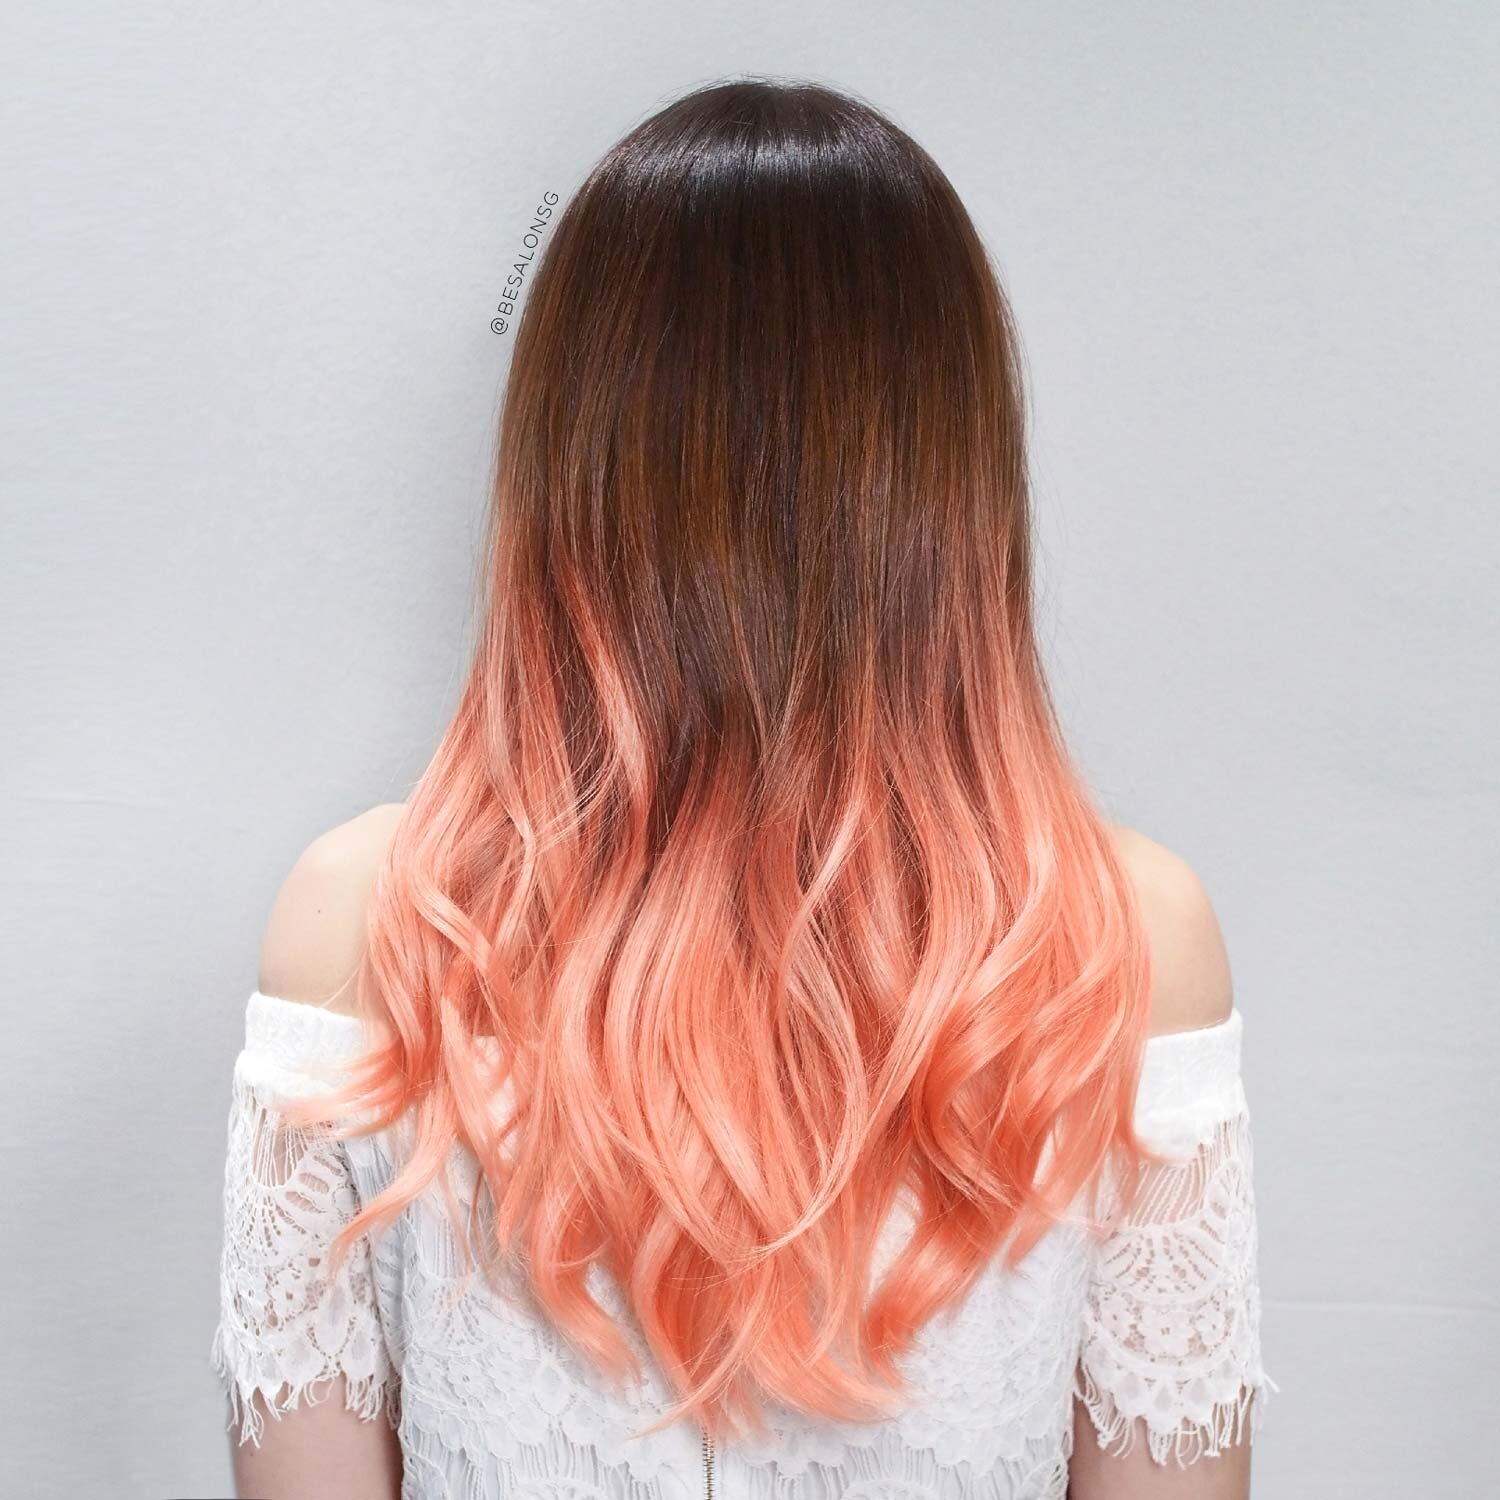 Ginger Peach Is Fall's Prettiest Ombré Hair Color Trend | Allure